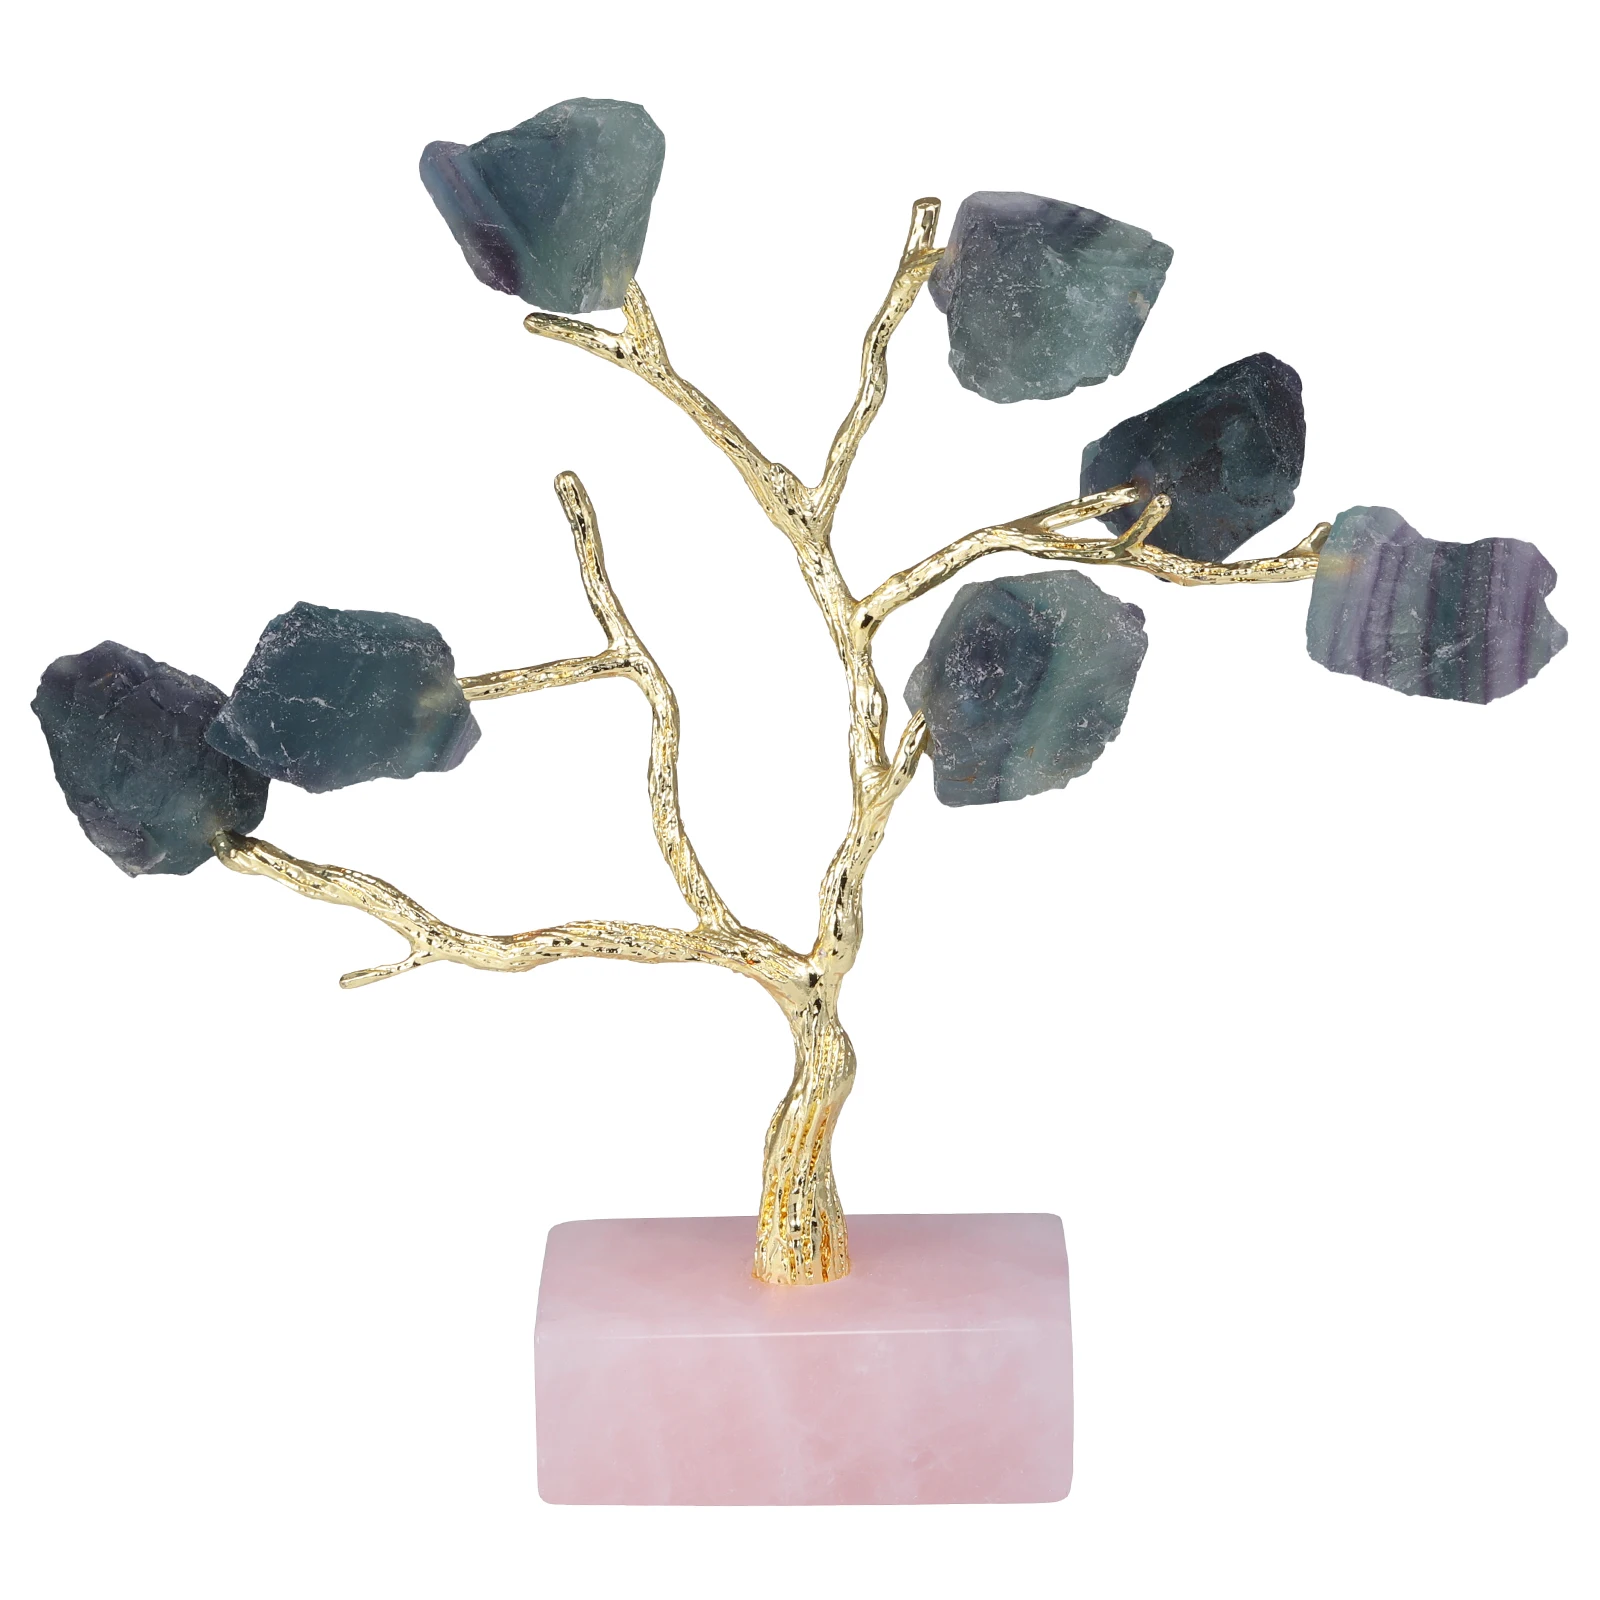 Natural Rough Crystal Stone Tree With Rose Quartz Base Healing Gemstone Golden Tree For Jewelry Organizer Home Table Decoration natural minerals crystal money tree with rough amethyst cluster base healing gemstone craft gift nordic home decoration ornament